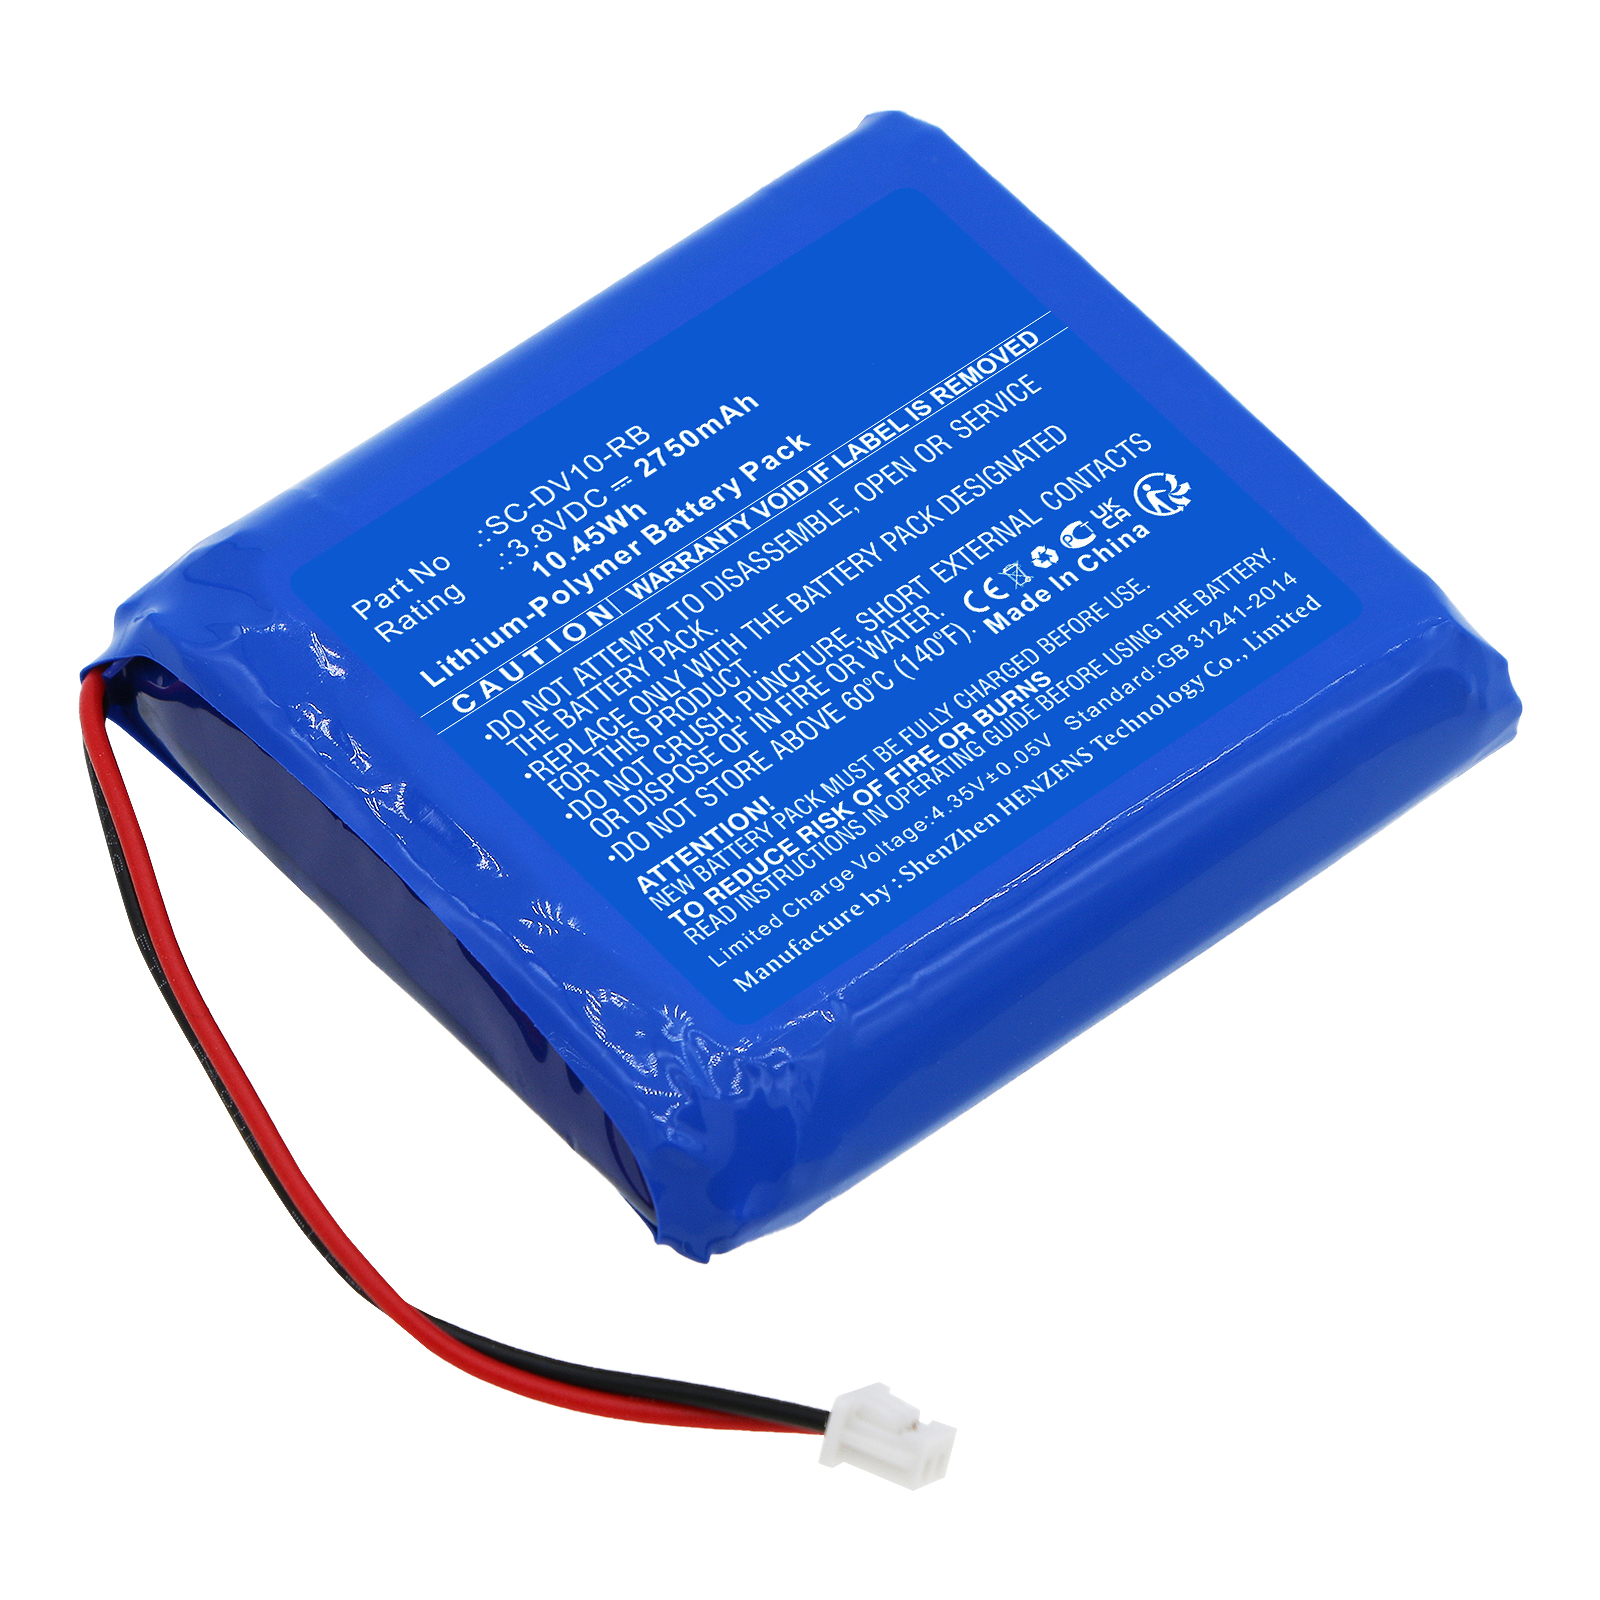 Synergy Digital Camera Battery, Compatible with PatrolEyes SC-DV10-RB Digital Camera Battery (Li-Pol, 3.8V, 2750mAh)